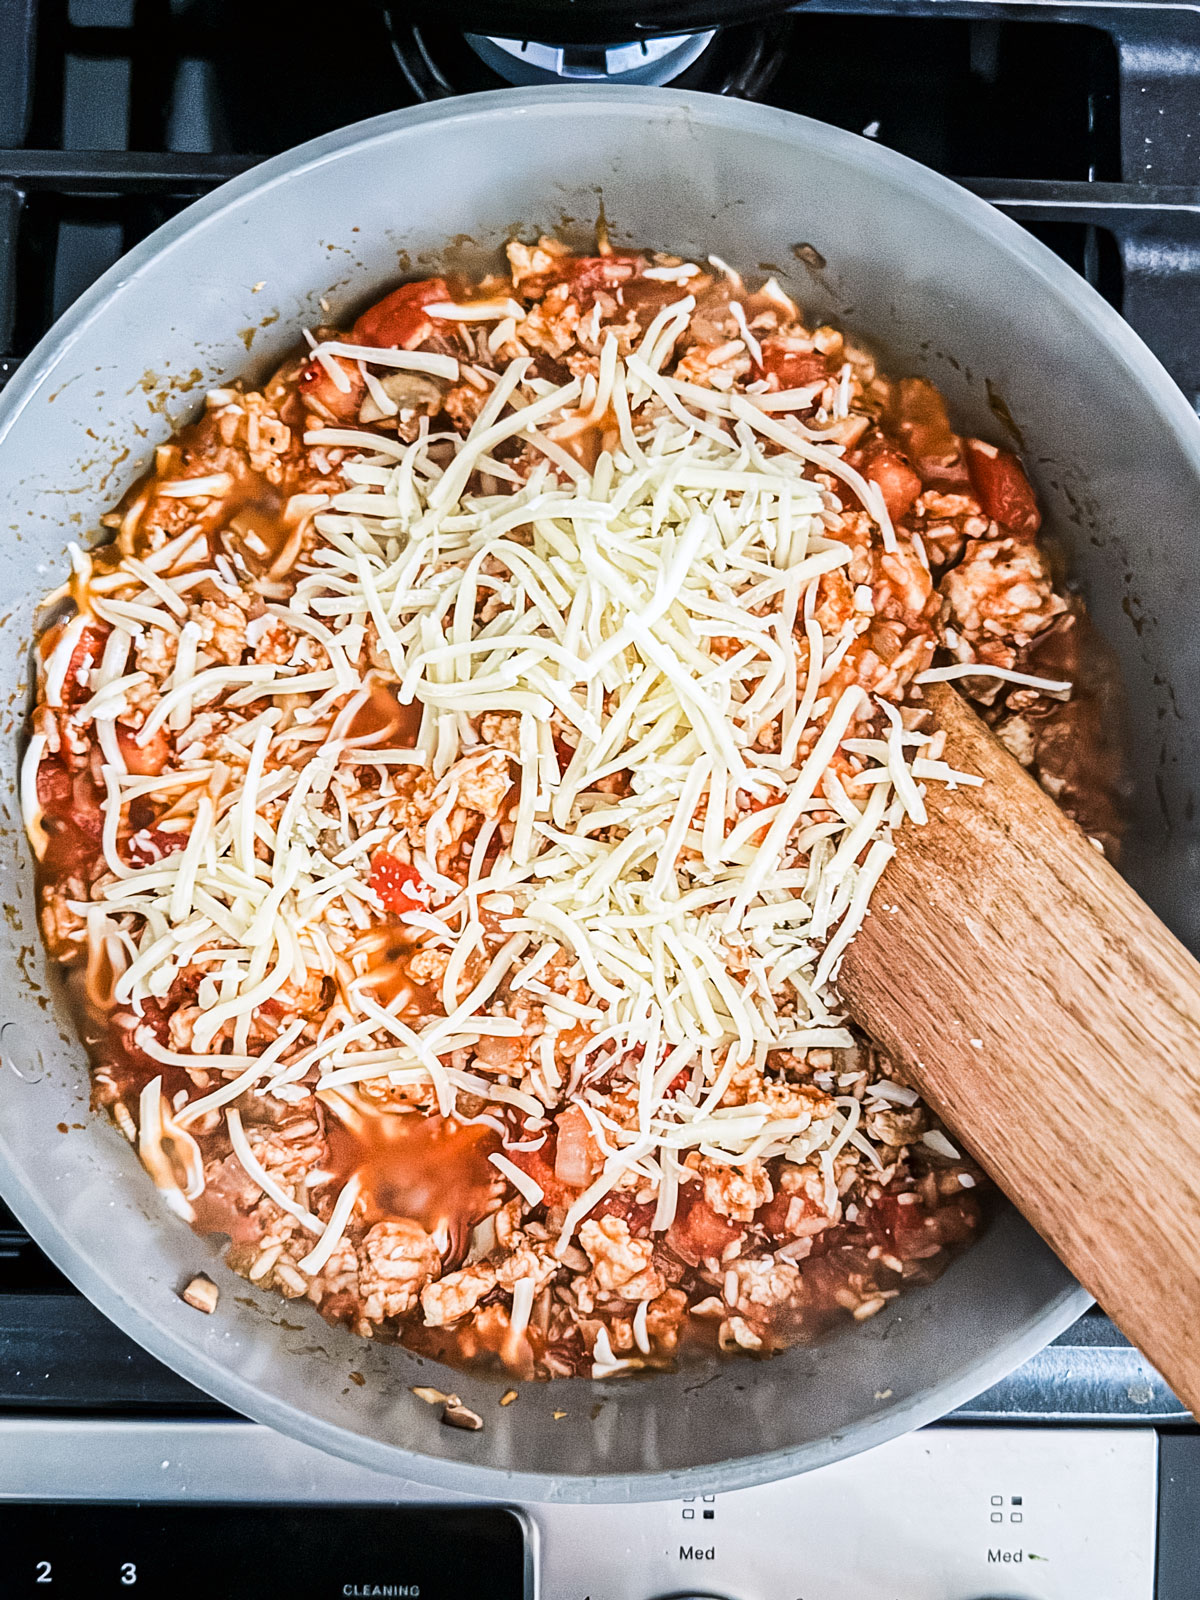 Saucy ground turkey sprinkled with cheese in a skillet.